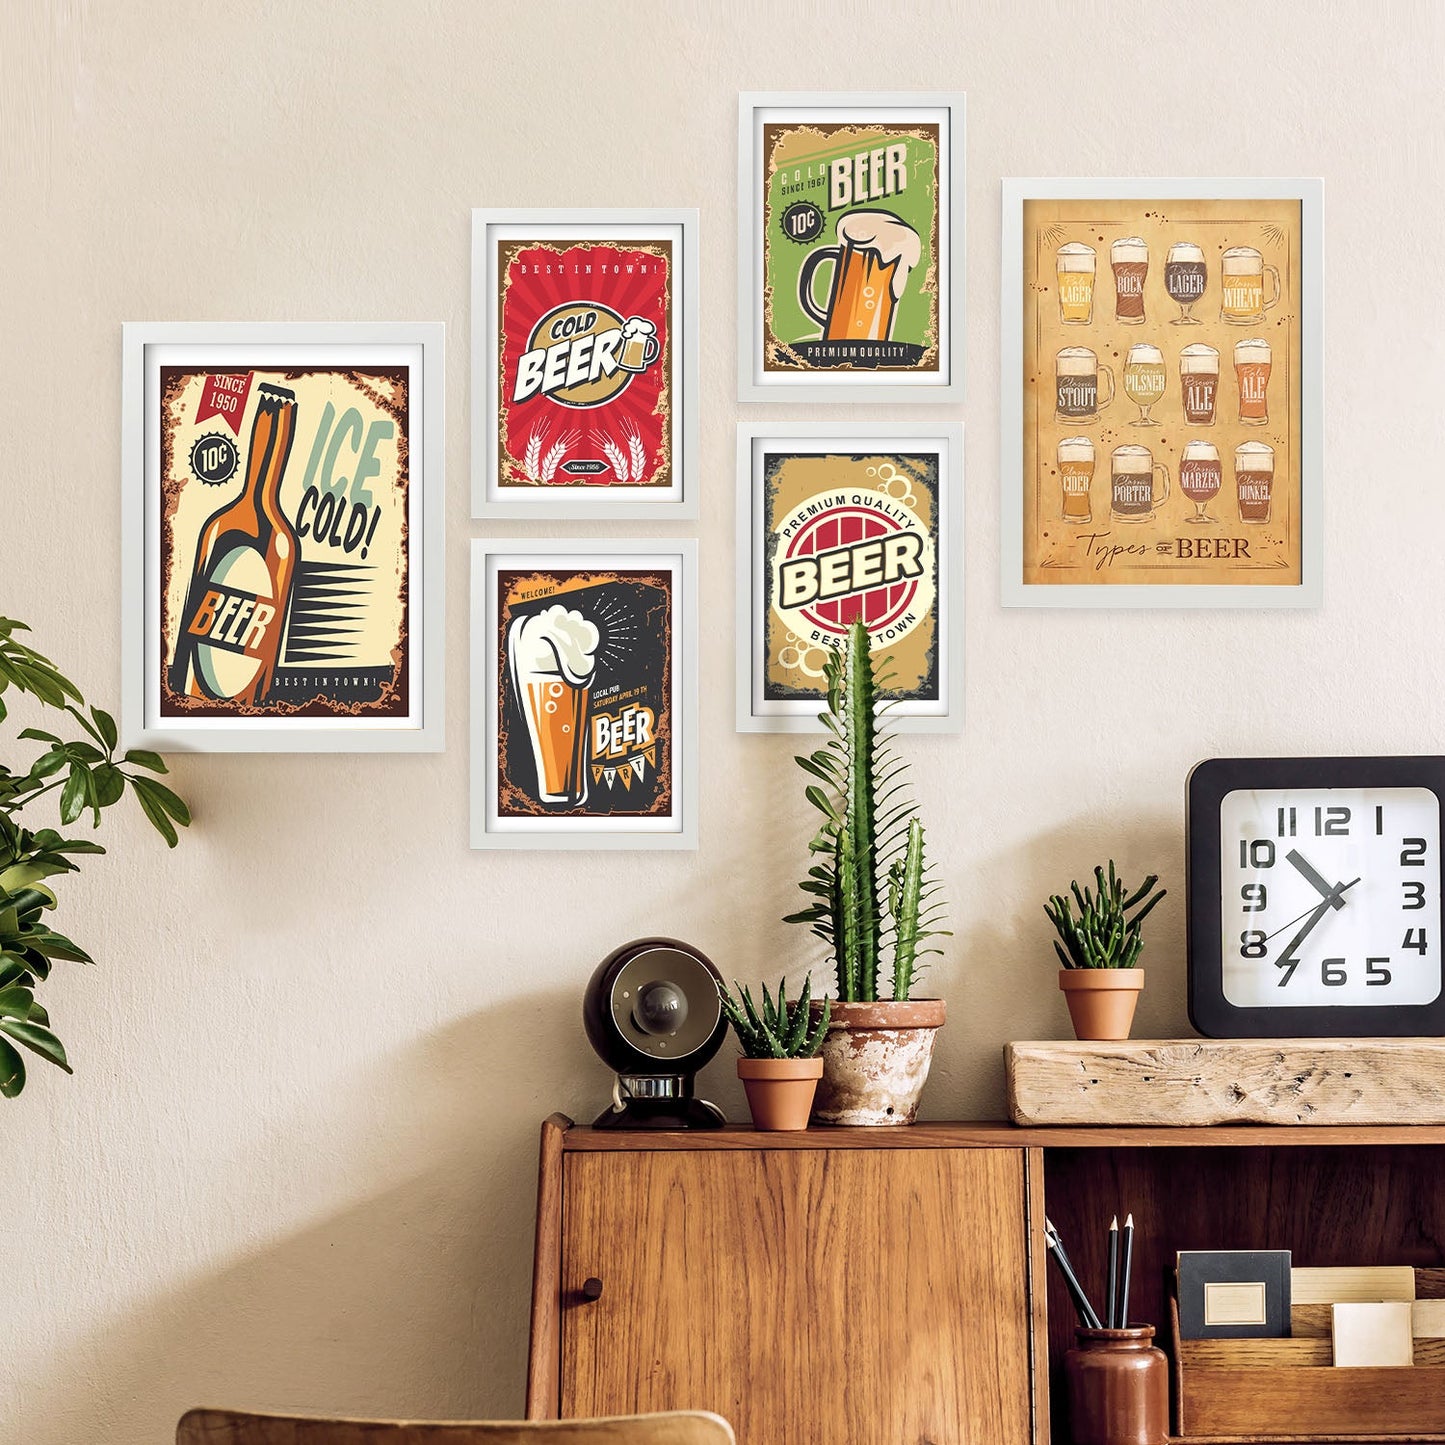 Nacnic CERVEZA. Aesthetic Wall Art Prints for Bedroom or Living Room Design.